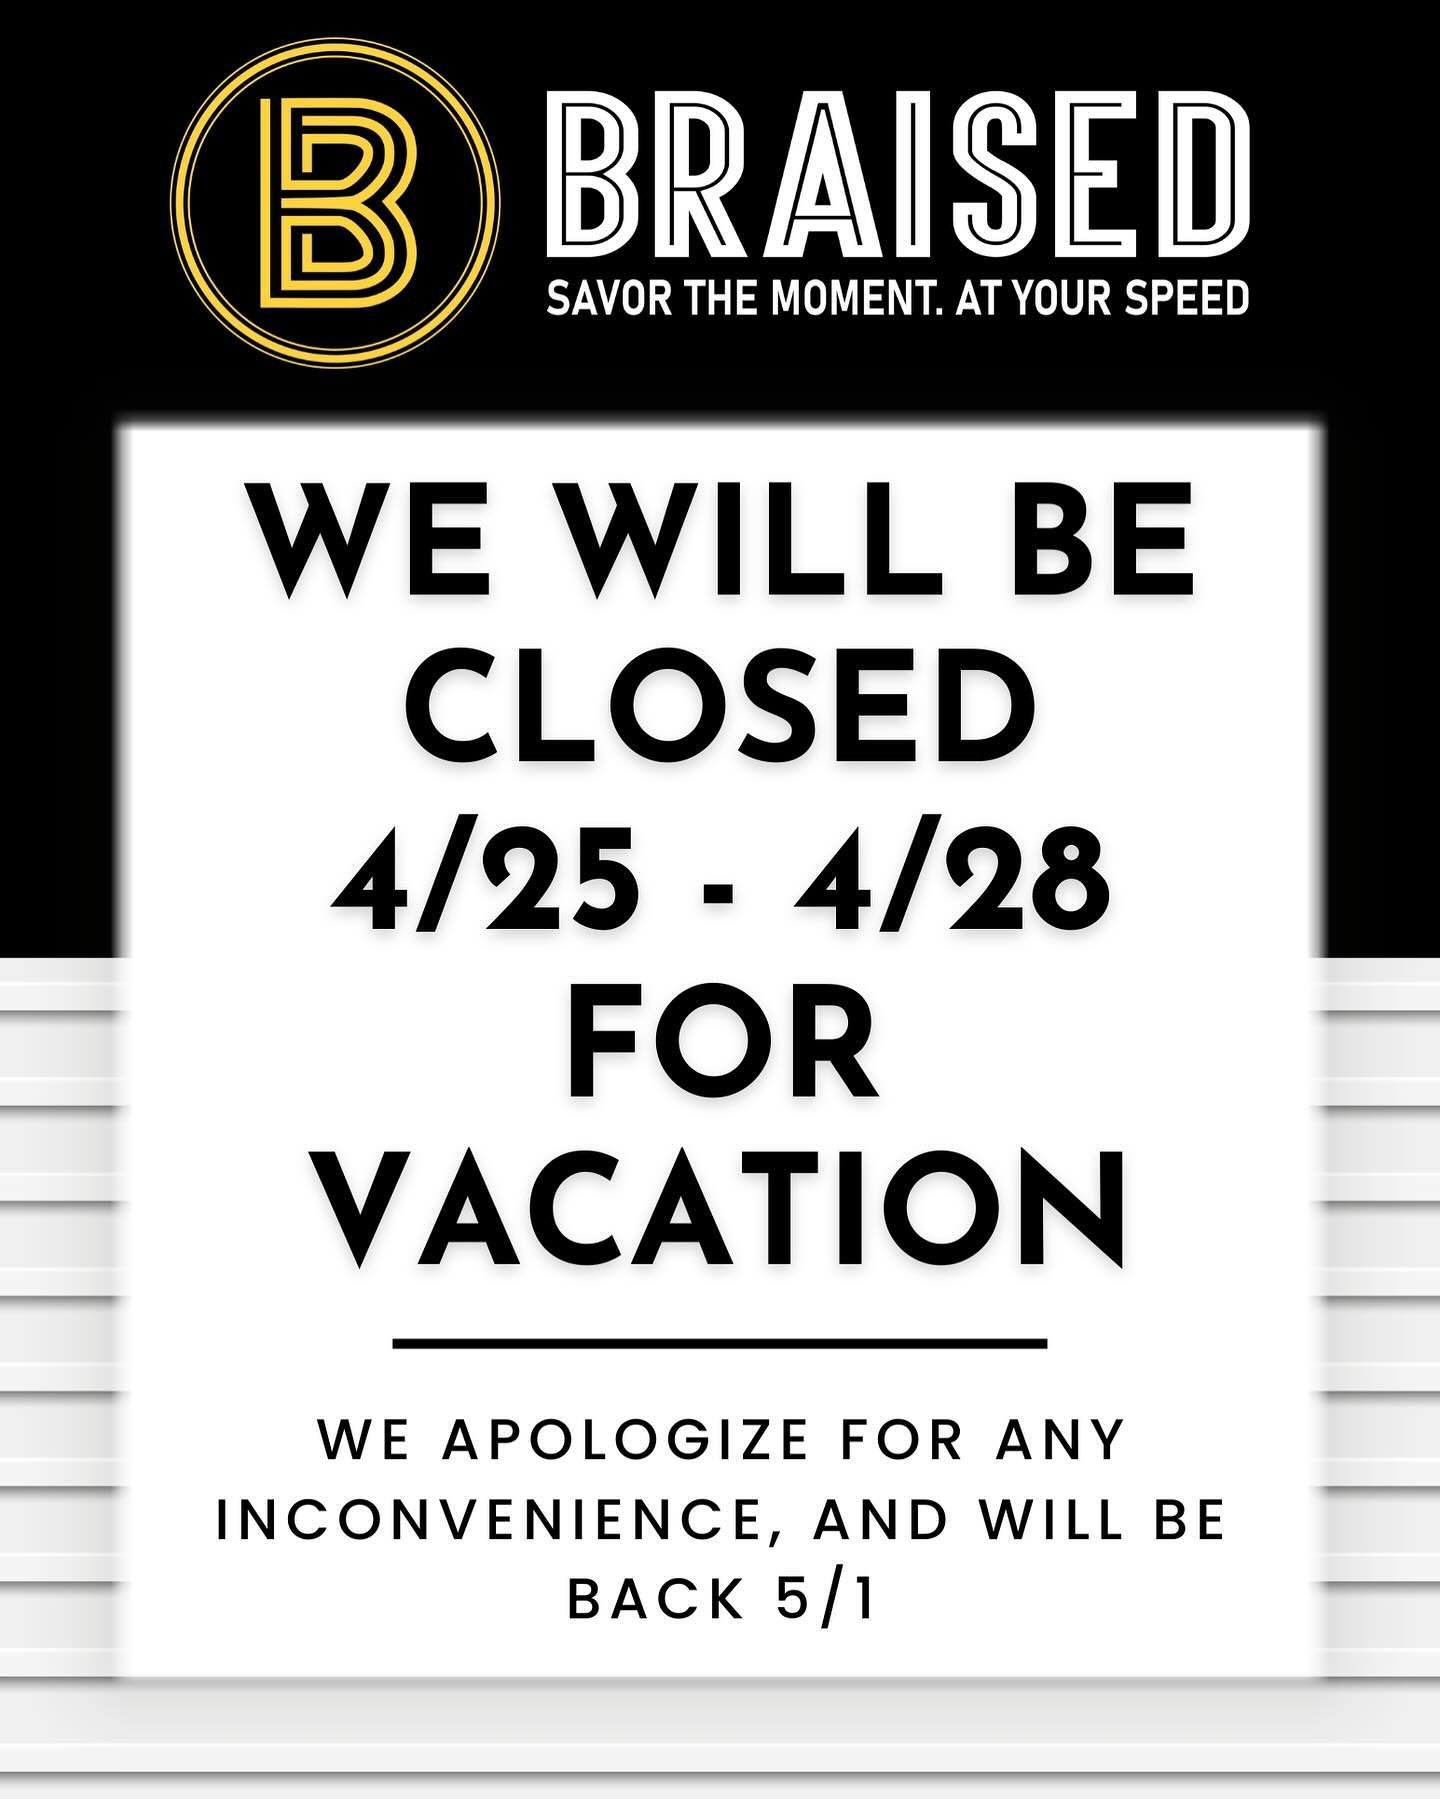 For the first time since our Braised Baby joined us, we are taking a vacation together! So we will be closed this week from Thursday - Sunday.

BUT we will be serving free samples of our new Spring Menu from 3PM - 6PM on Wednesday!!!

If you haven&rs